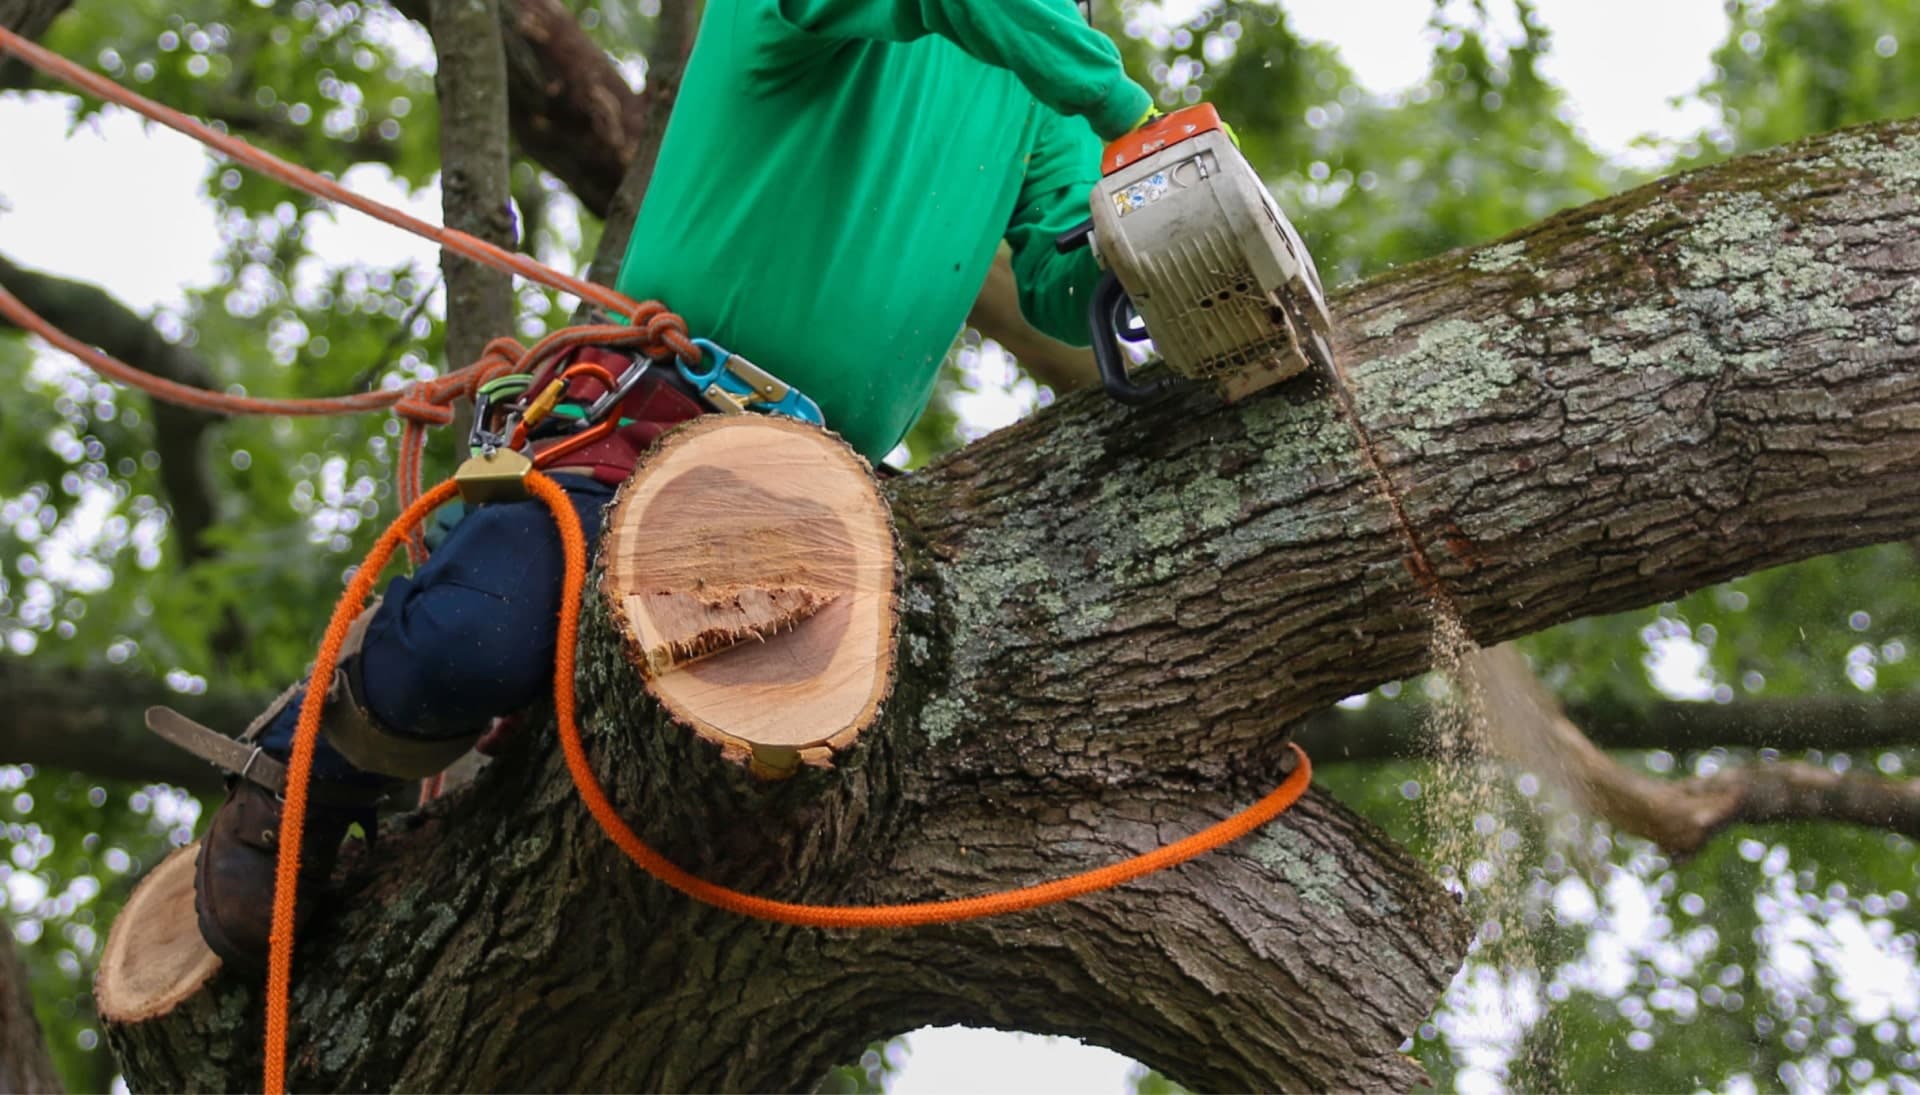 Shed your worries away with best tree removal in Northridge